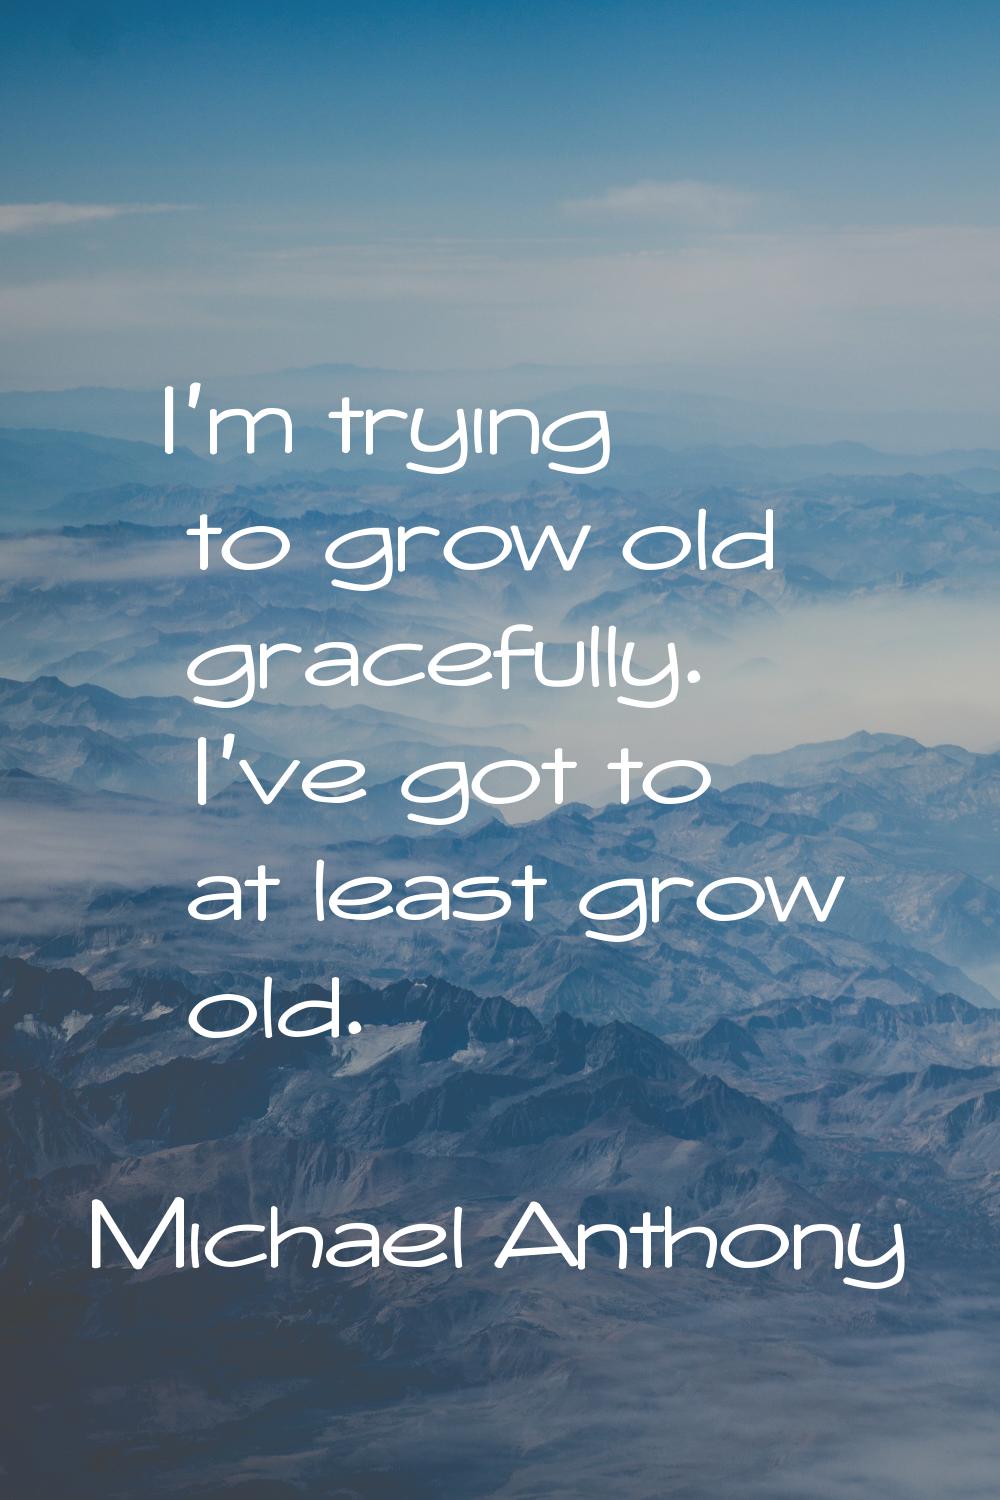 I'm trying to grow old gracefully. I've got to at least grow old.